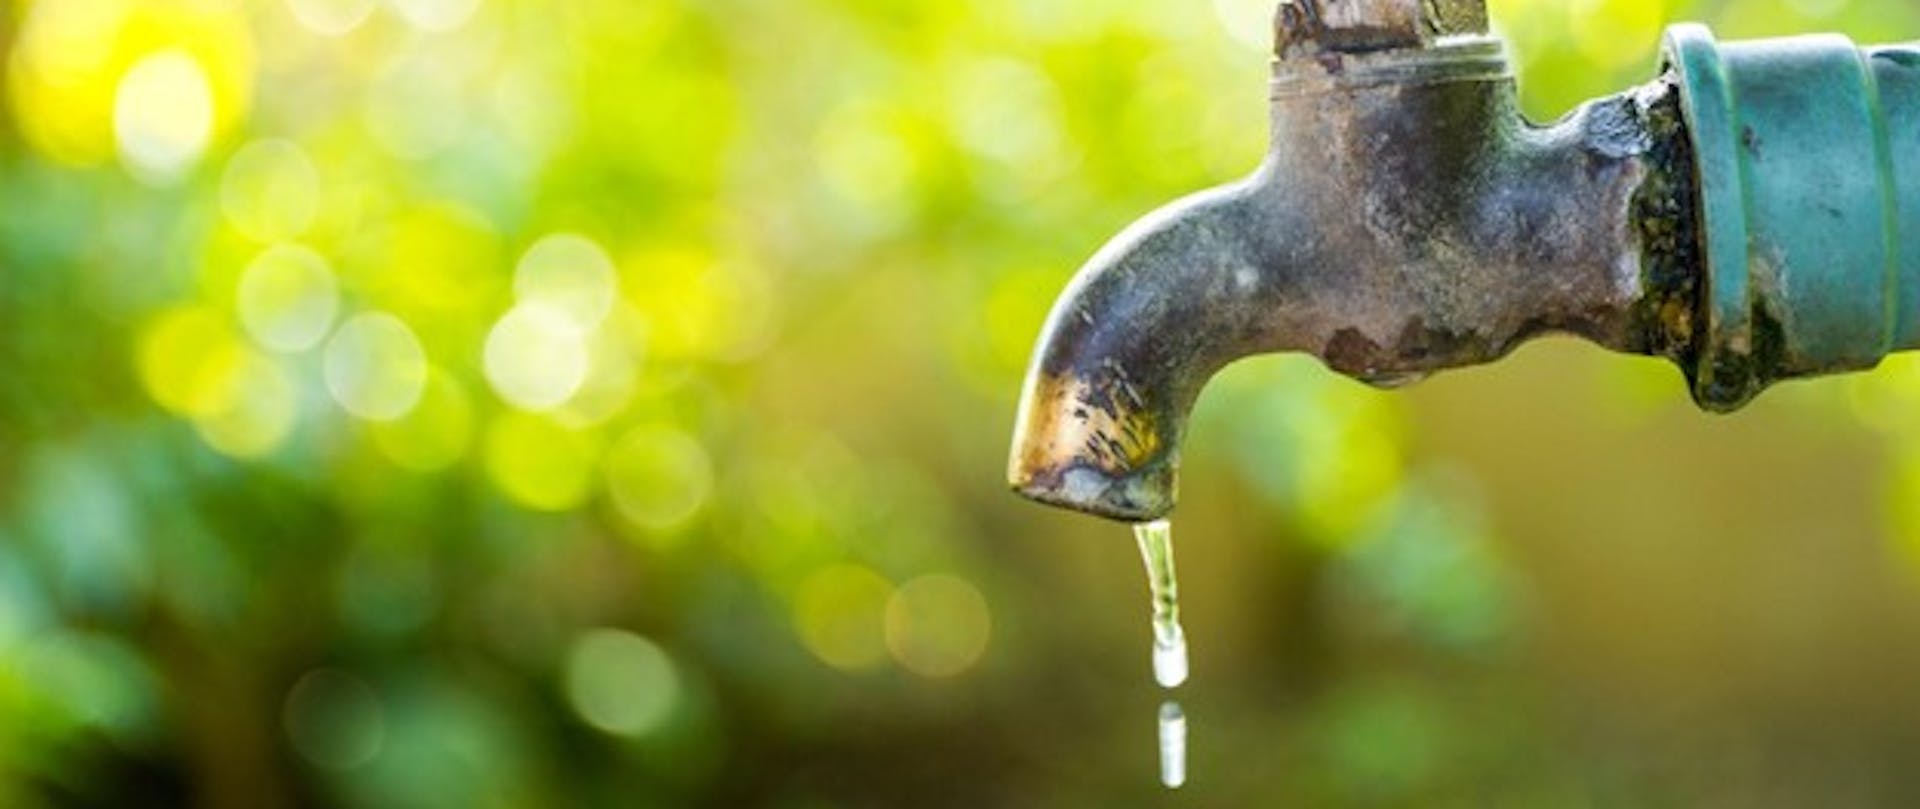 Water Conservation: Why It's Important and What You Can Do